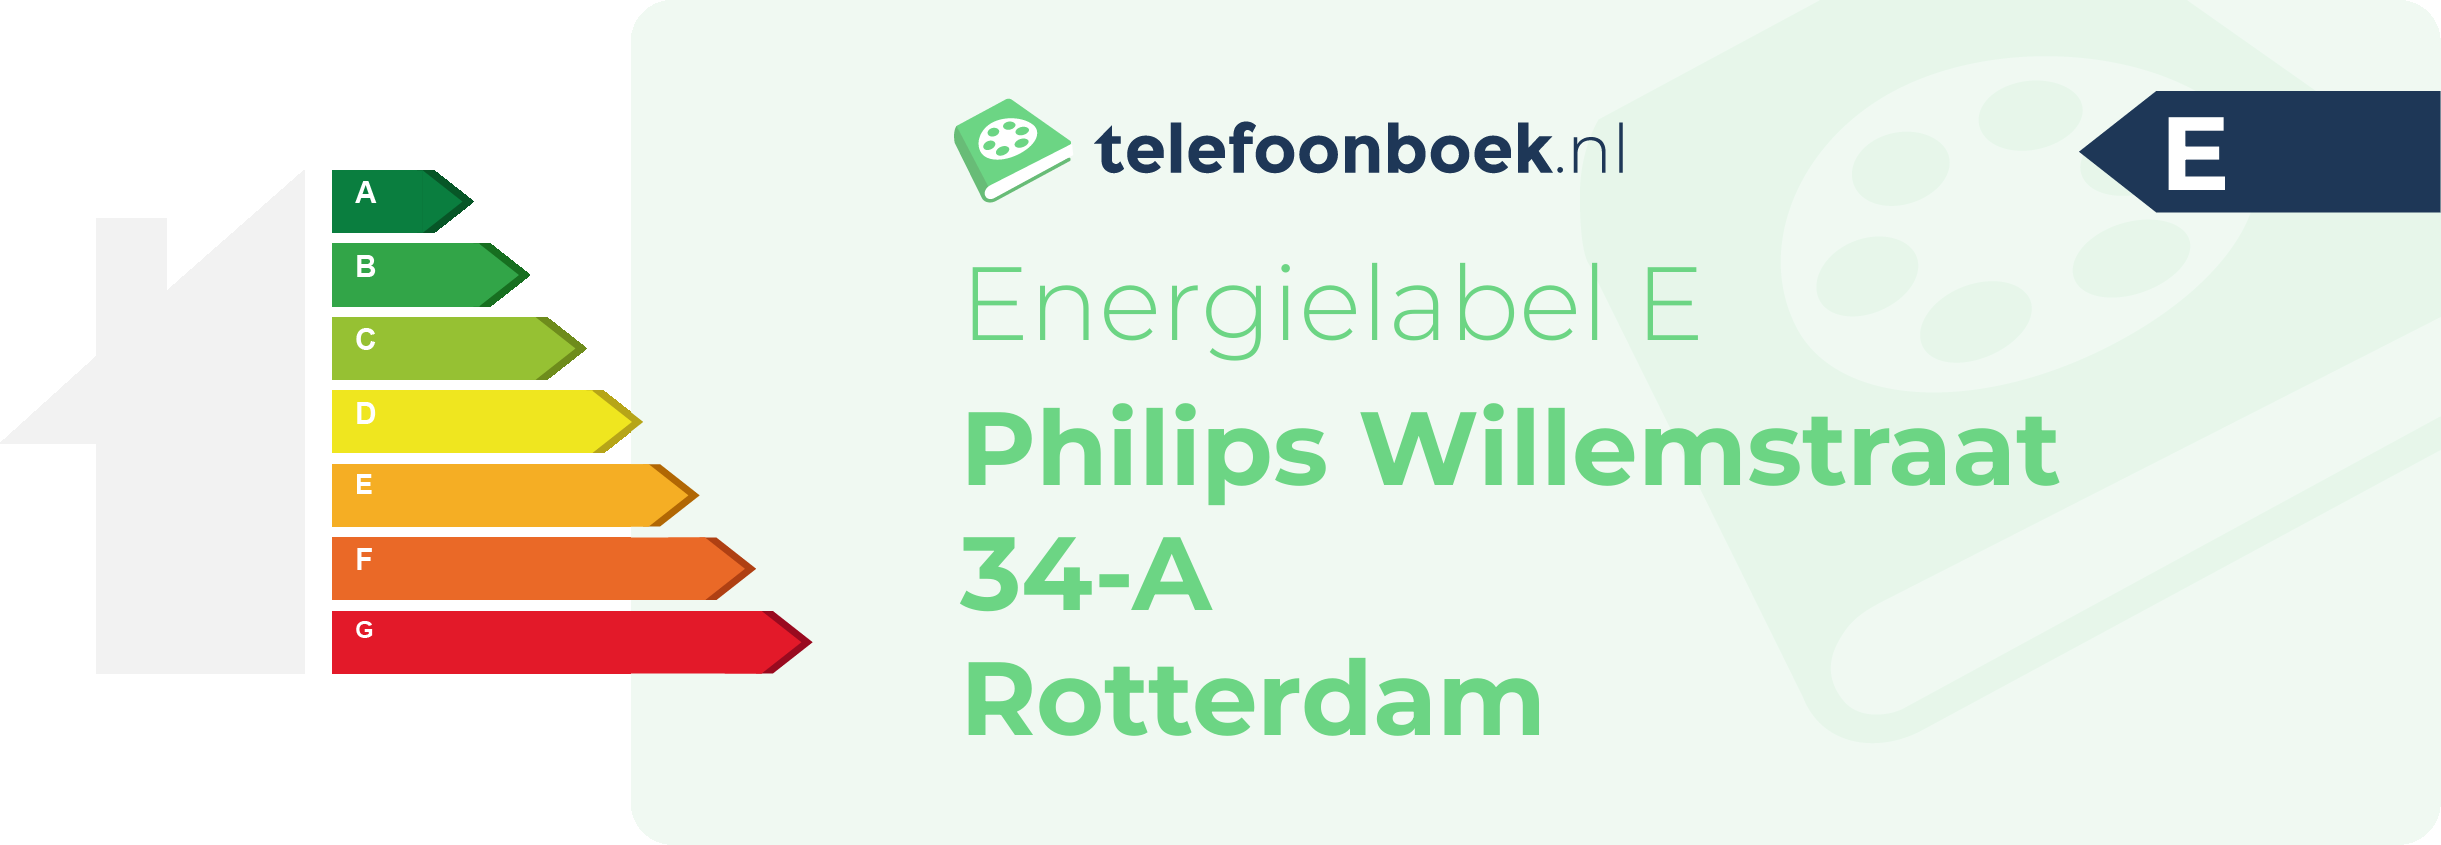 Energielabel Philips Willemstraat 34-A Rotterdam